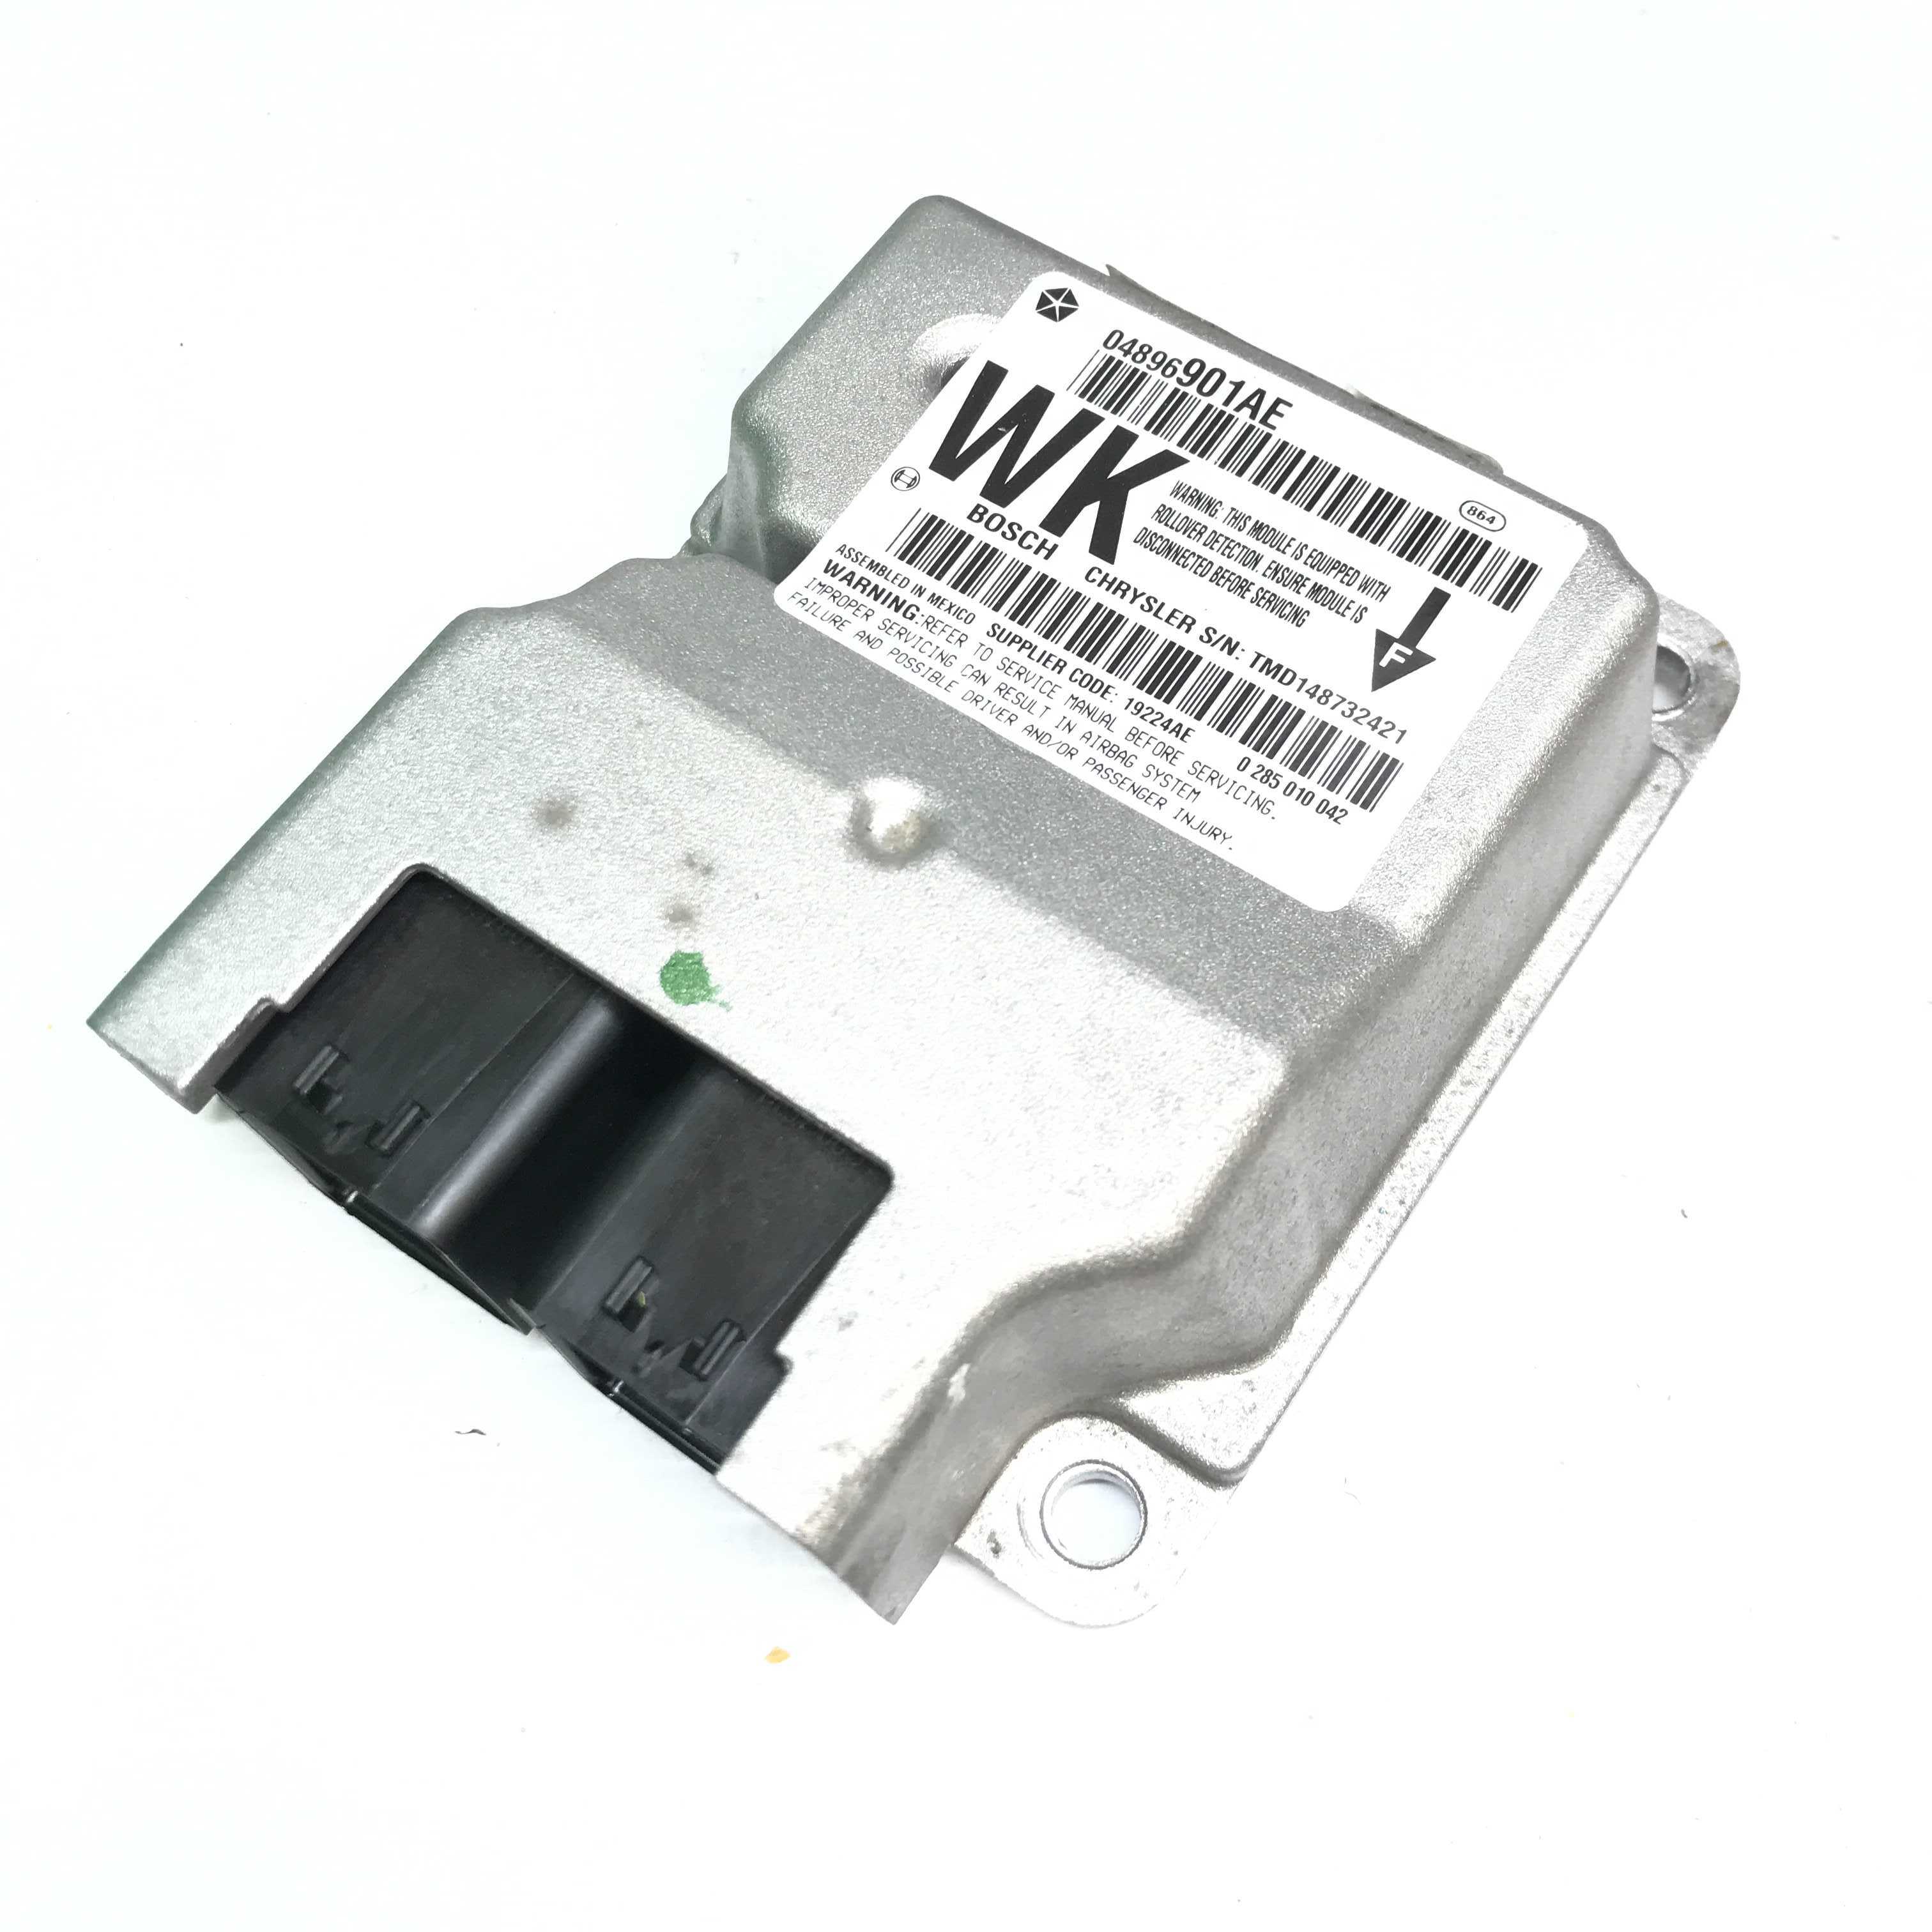 JEEP GRAND CHEROKEE SRS ORC ORM Occupant Control Module - Airbag Computer Control Module PART #04896901AE